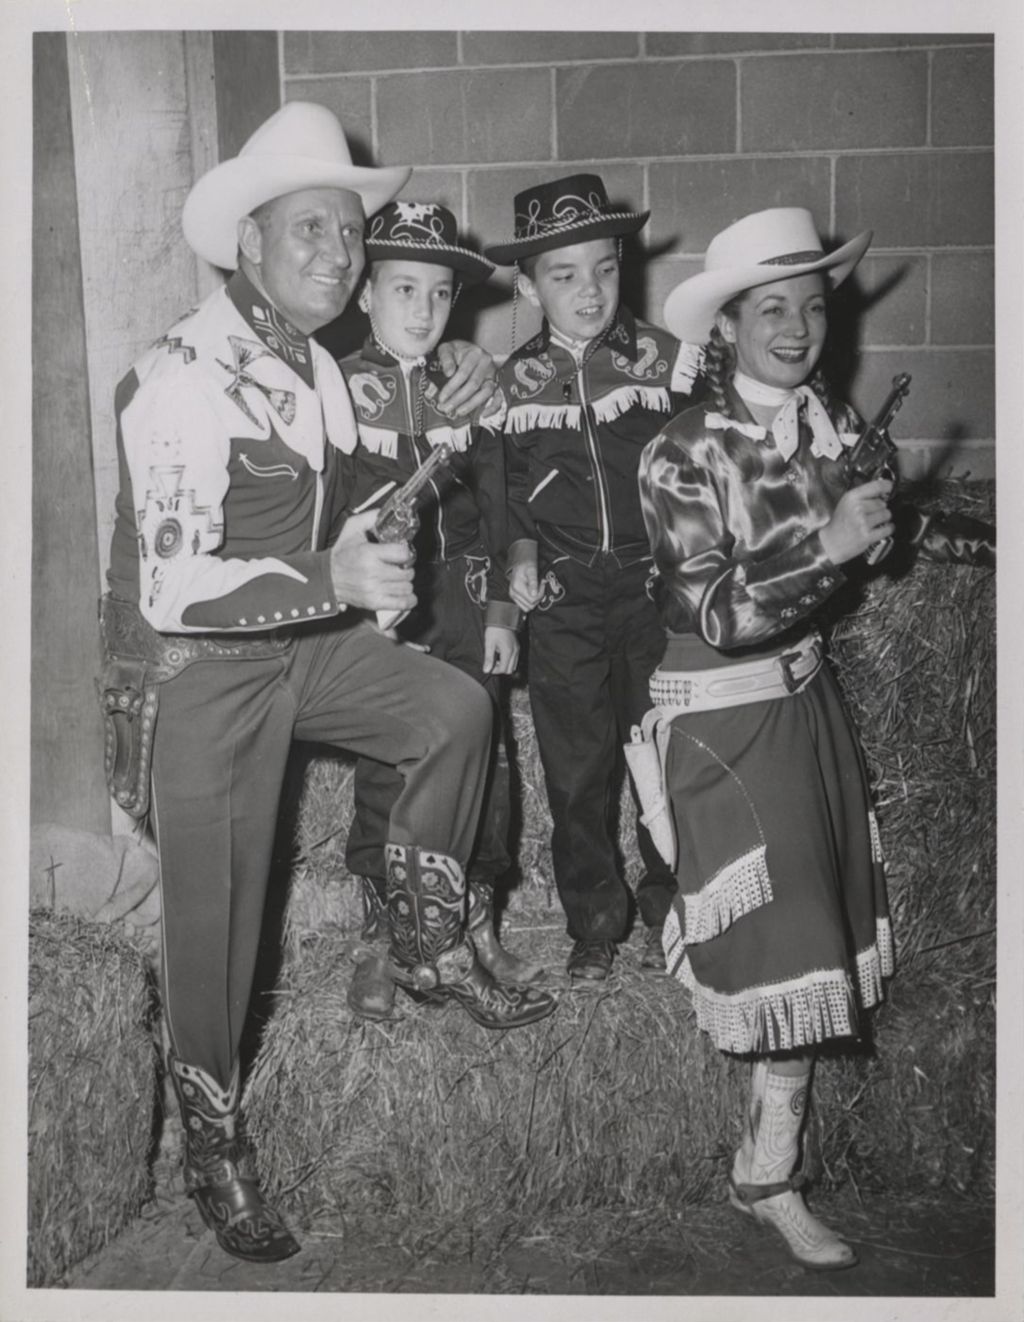 Miniature of Youngsters William and John Daley with Gene Autry and Dale Evans